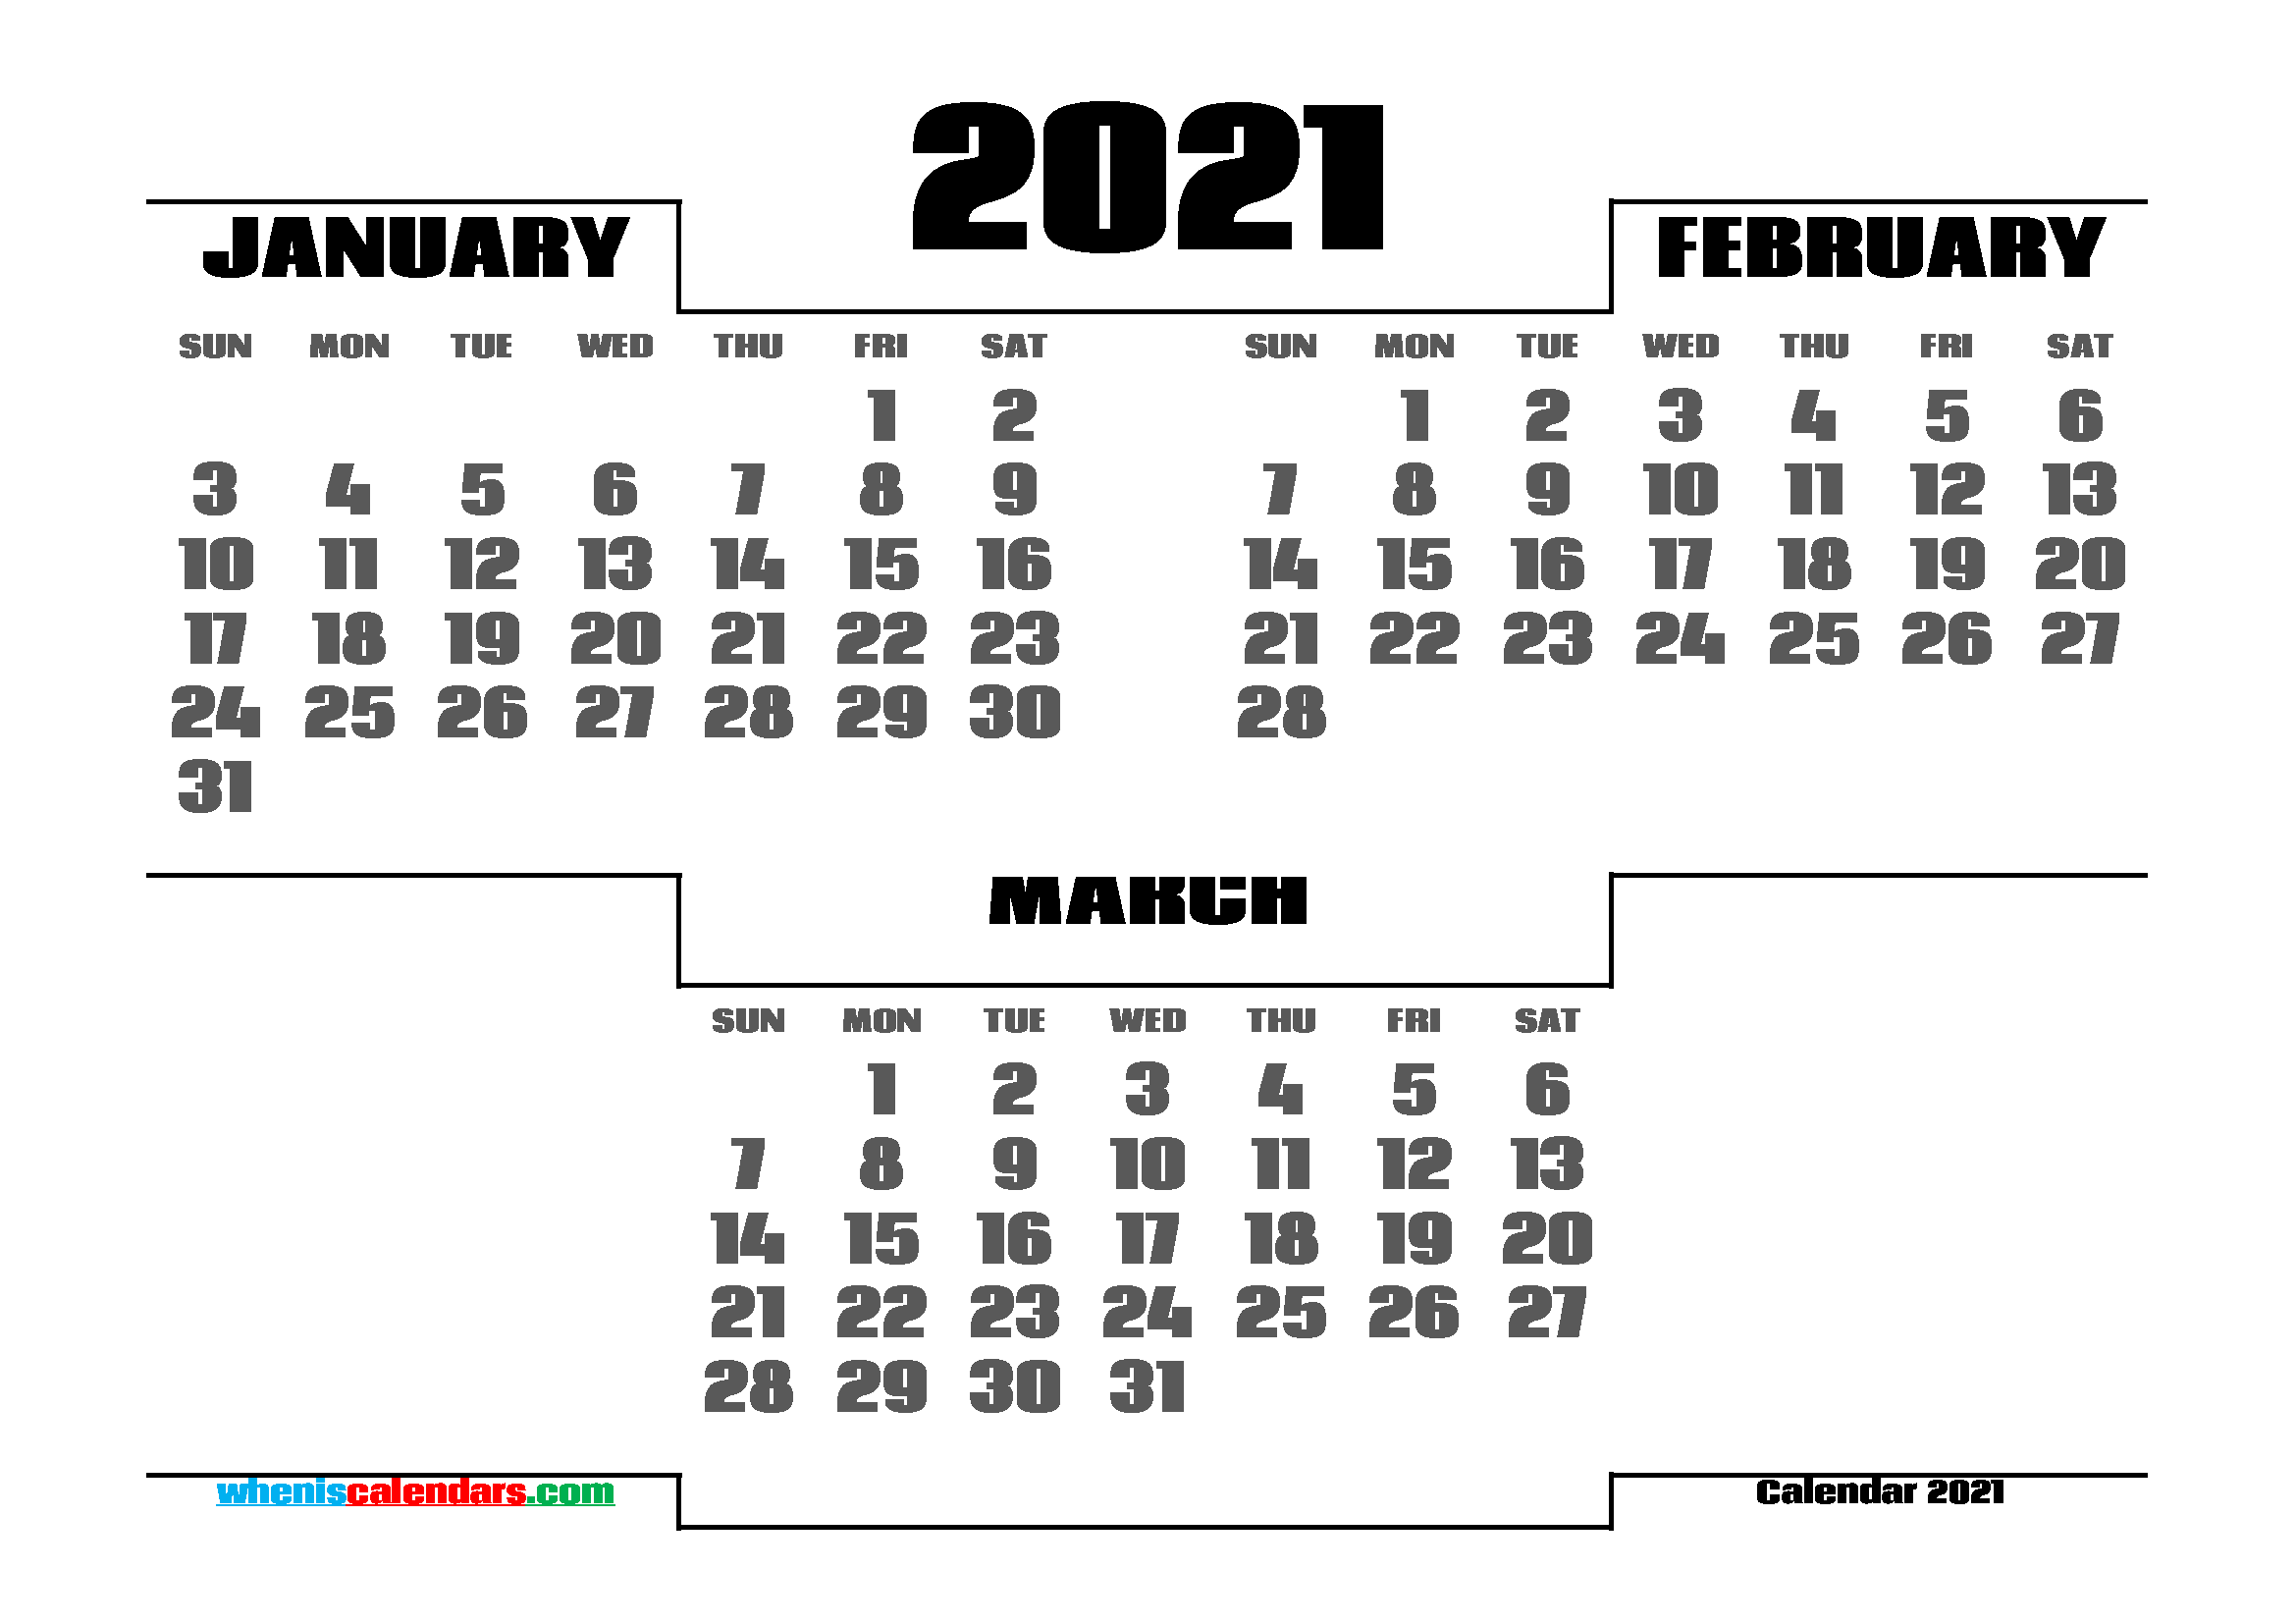 January February March 2021 Calendar printable 3 month calendar on one page